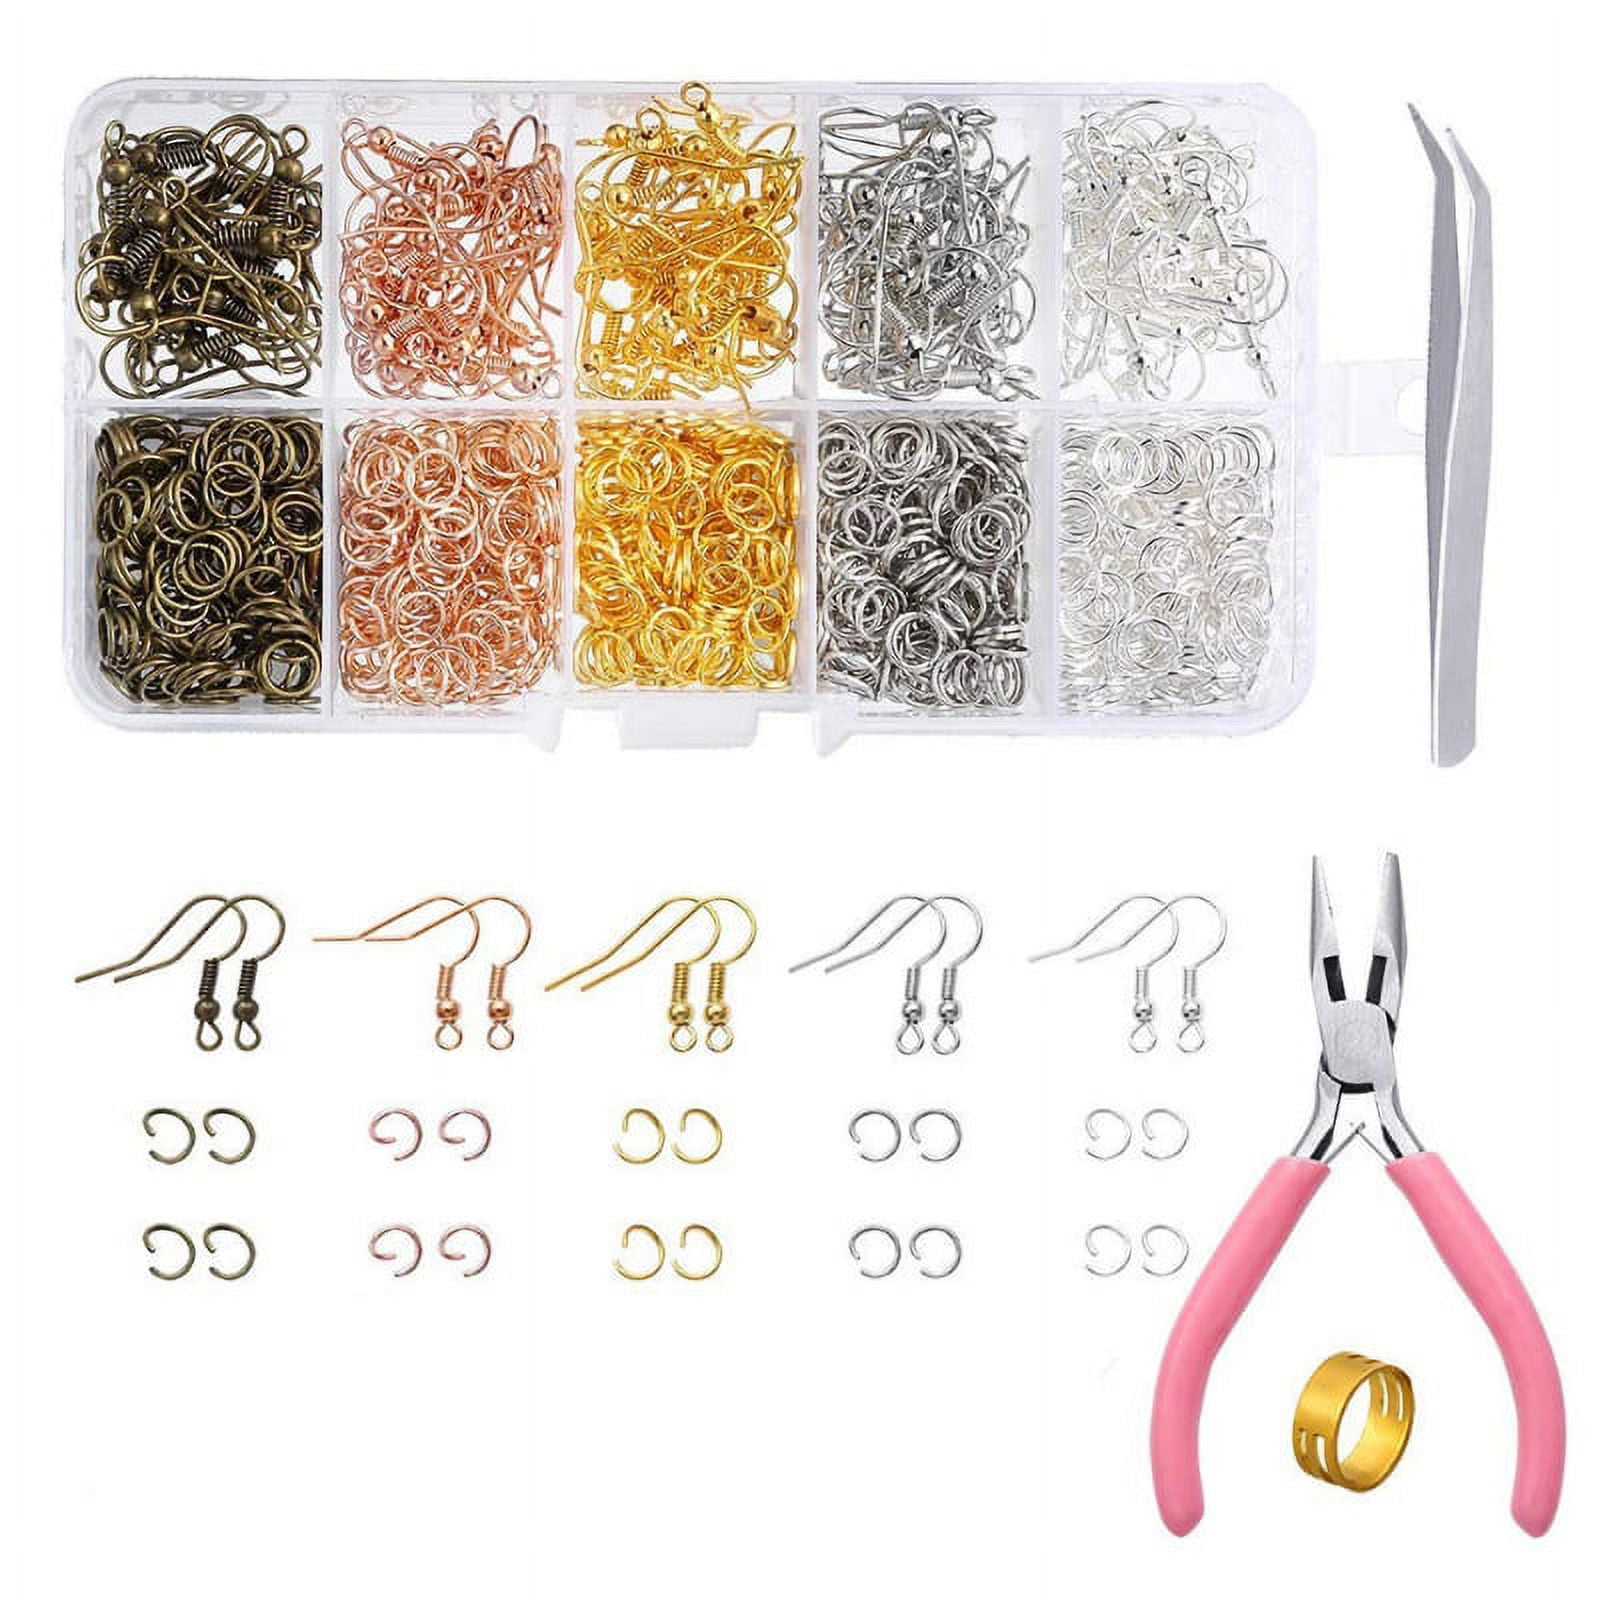 Techinal 1128 Pieces Earrings Making Supplies Kit with Earring